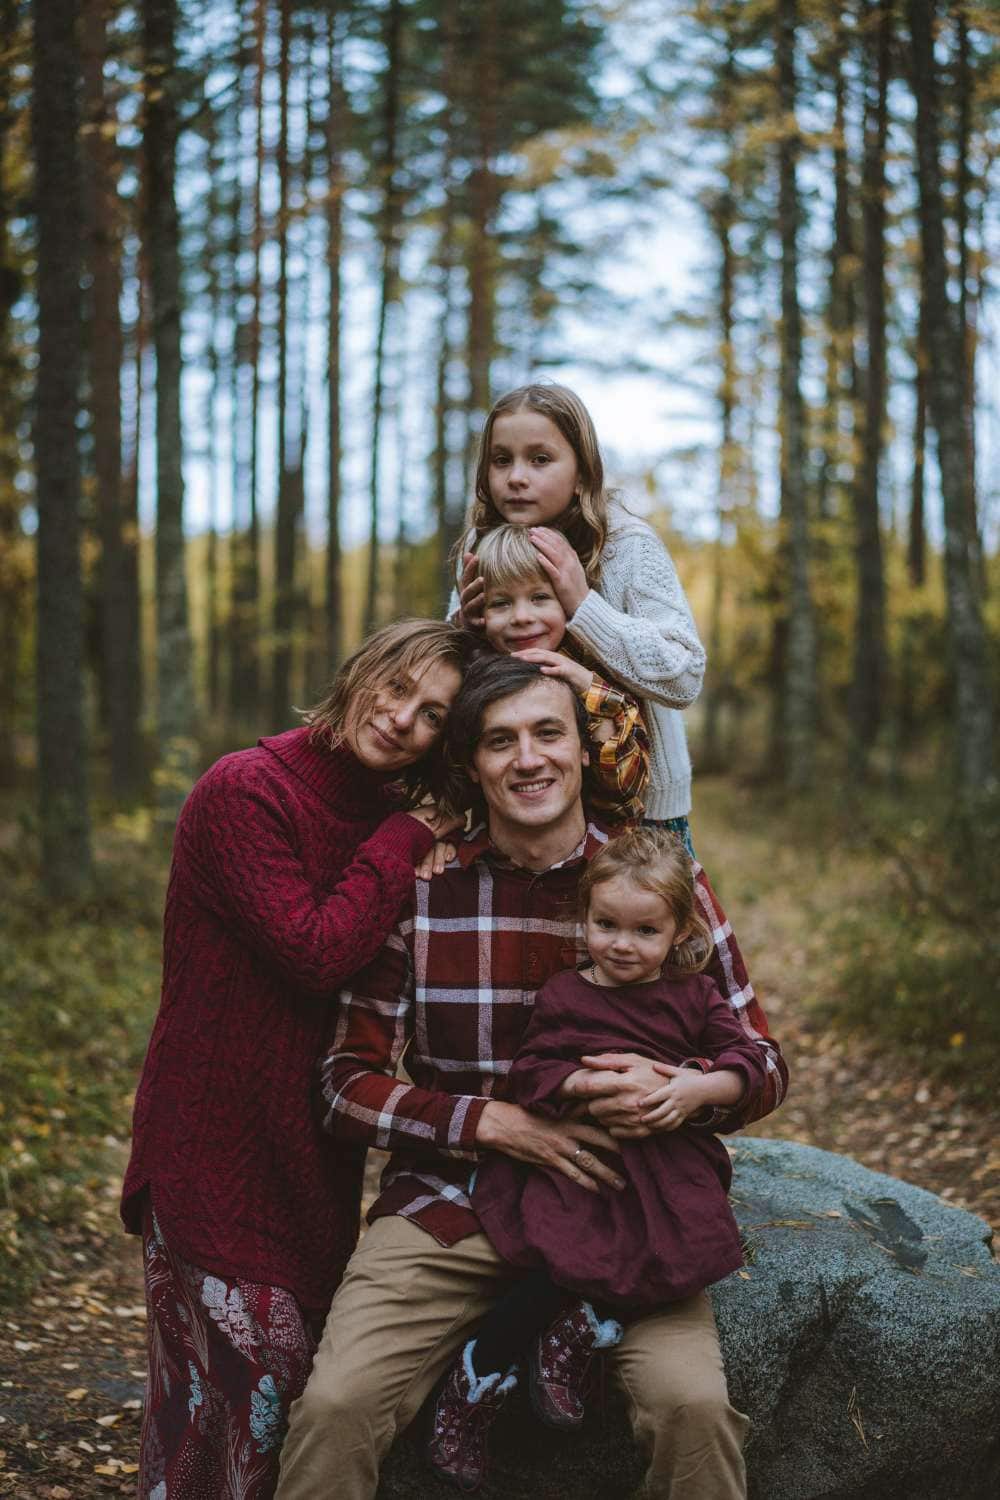 family fin matching shirts in woods for family photo shoot